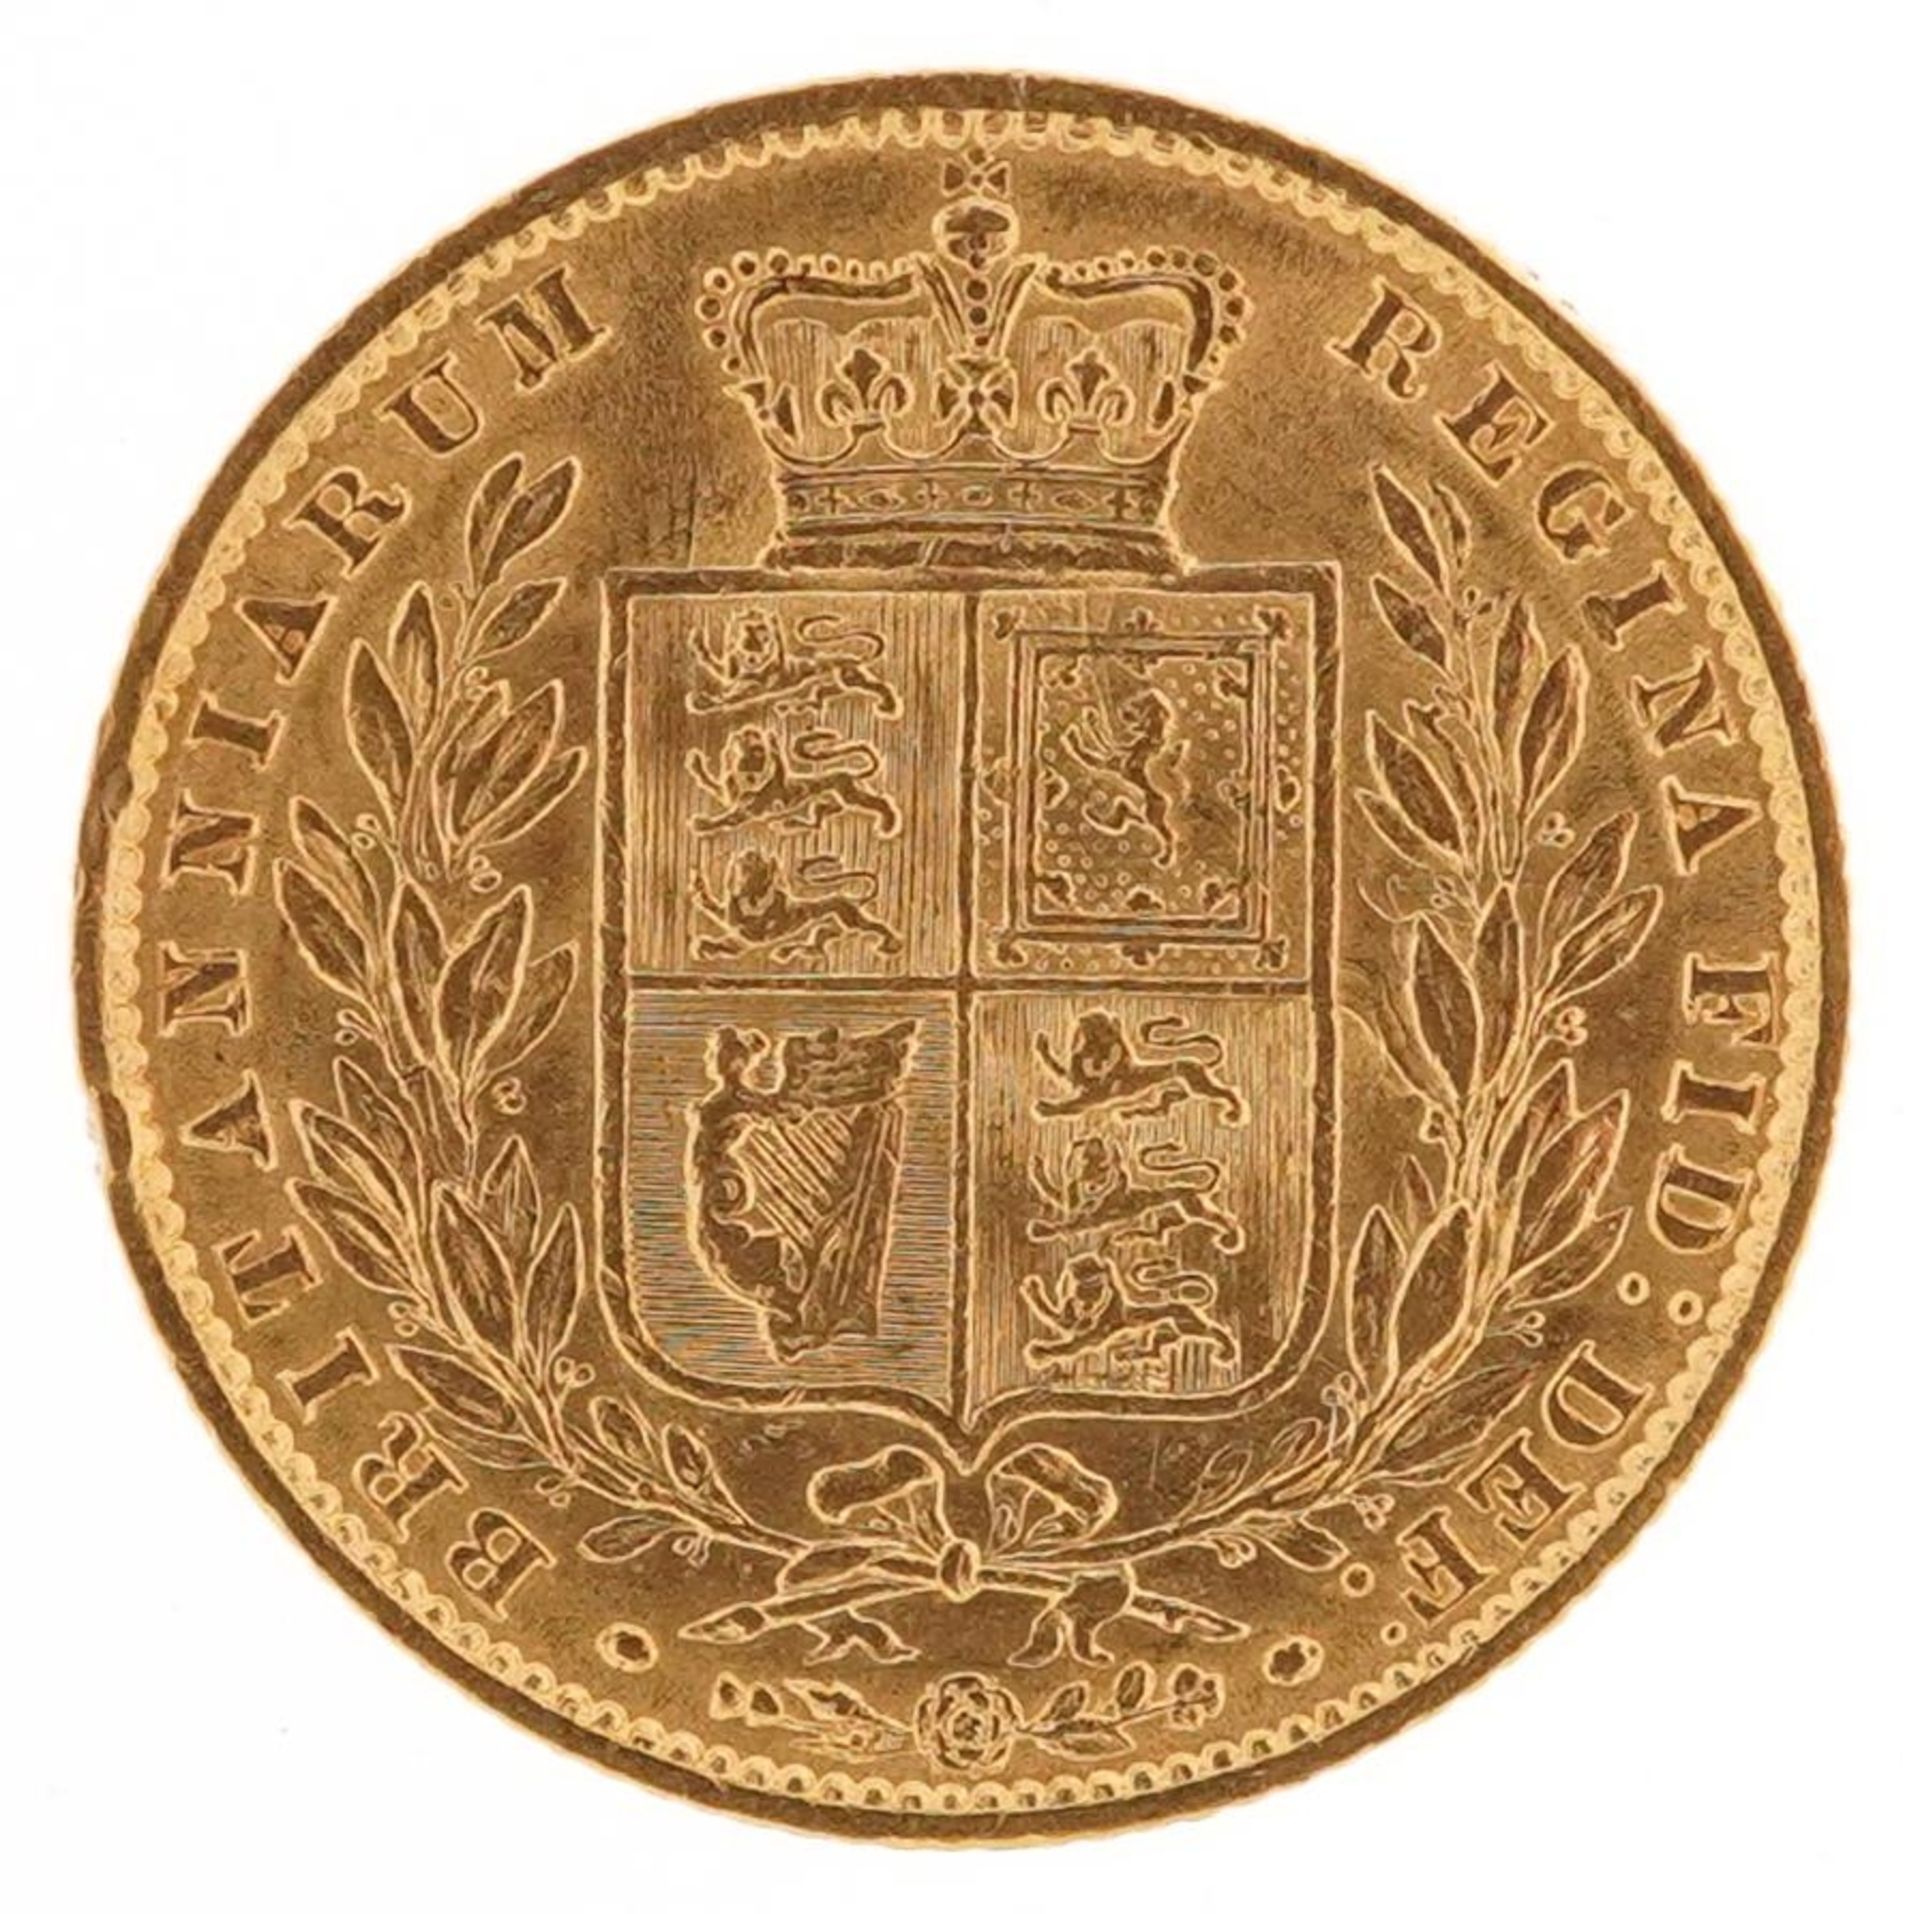 Victoria Young Head 1861 shield back gold sovereign